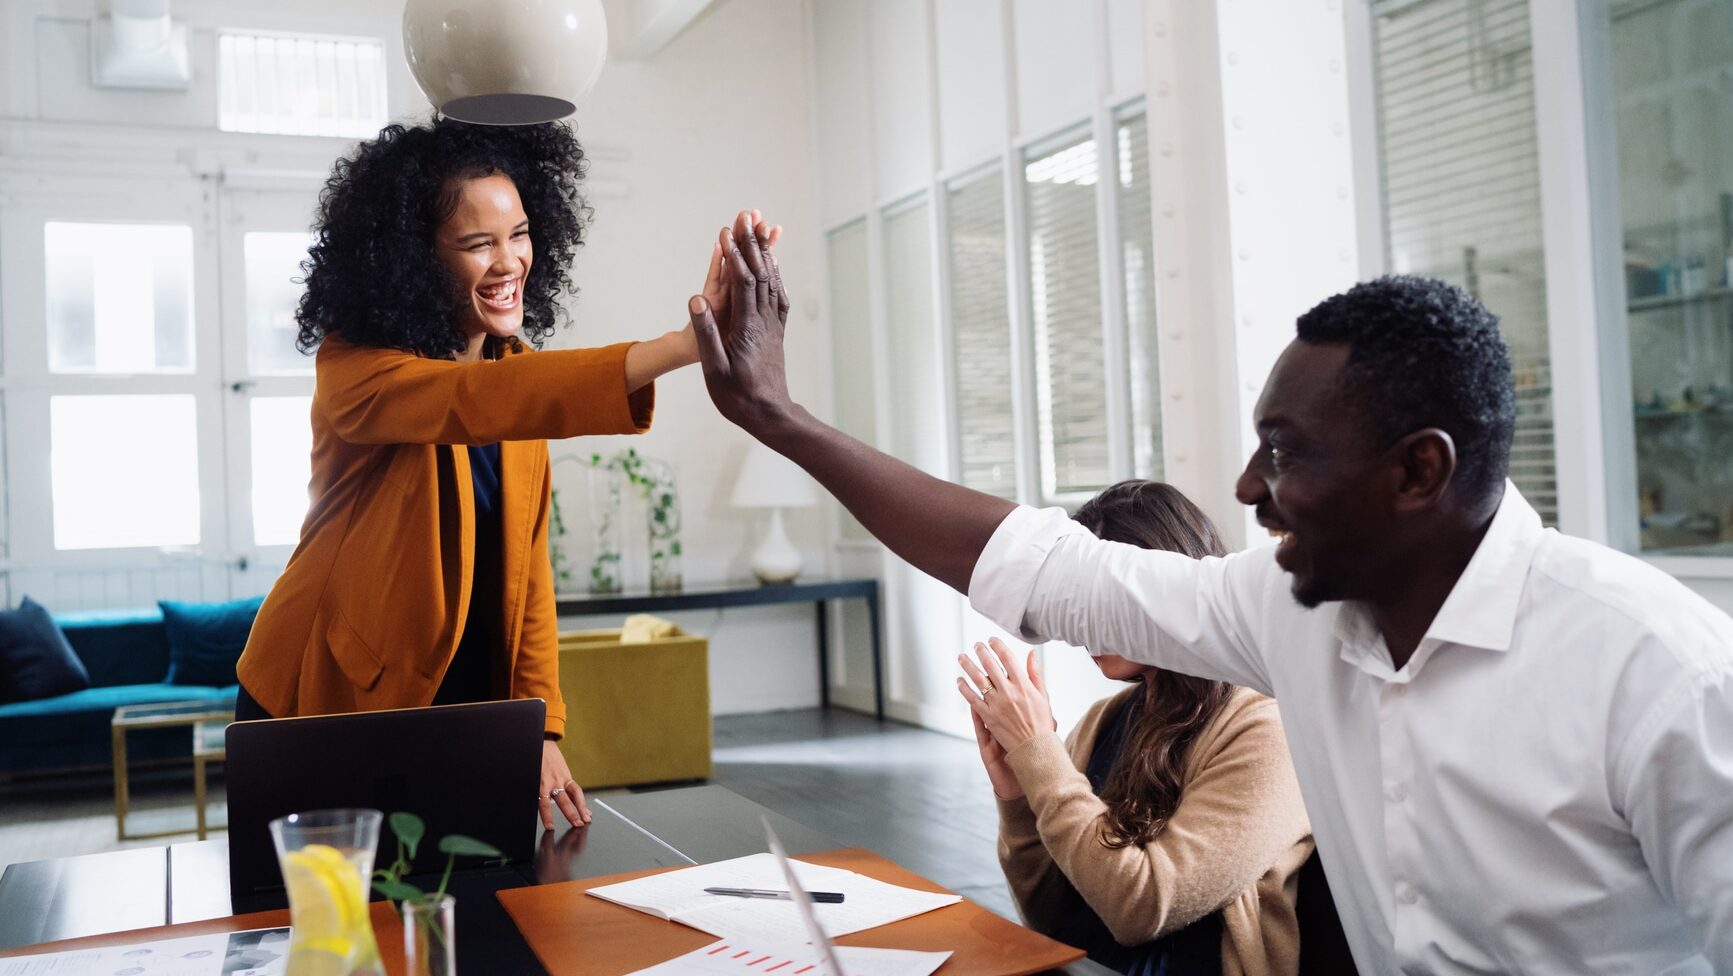 Employee Recognition: Strategies for the Modern Workplace